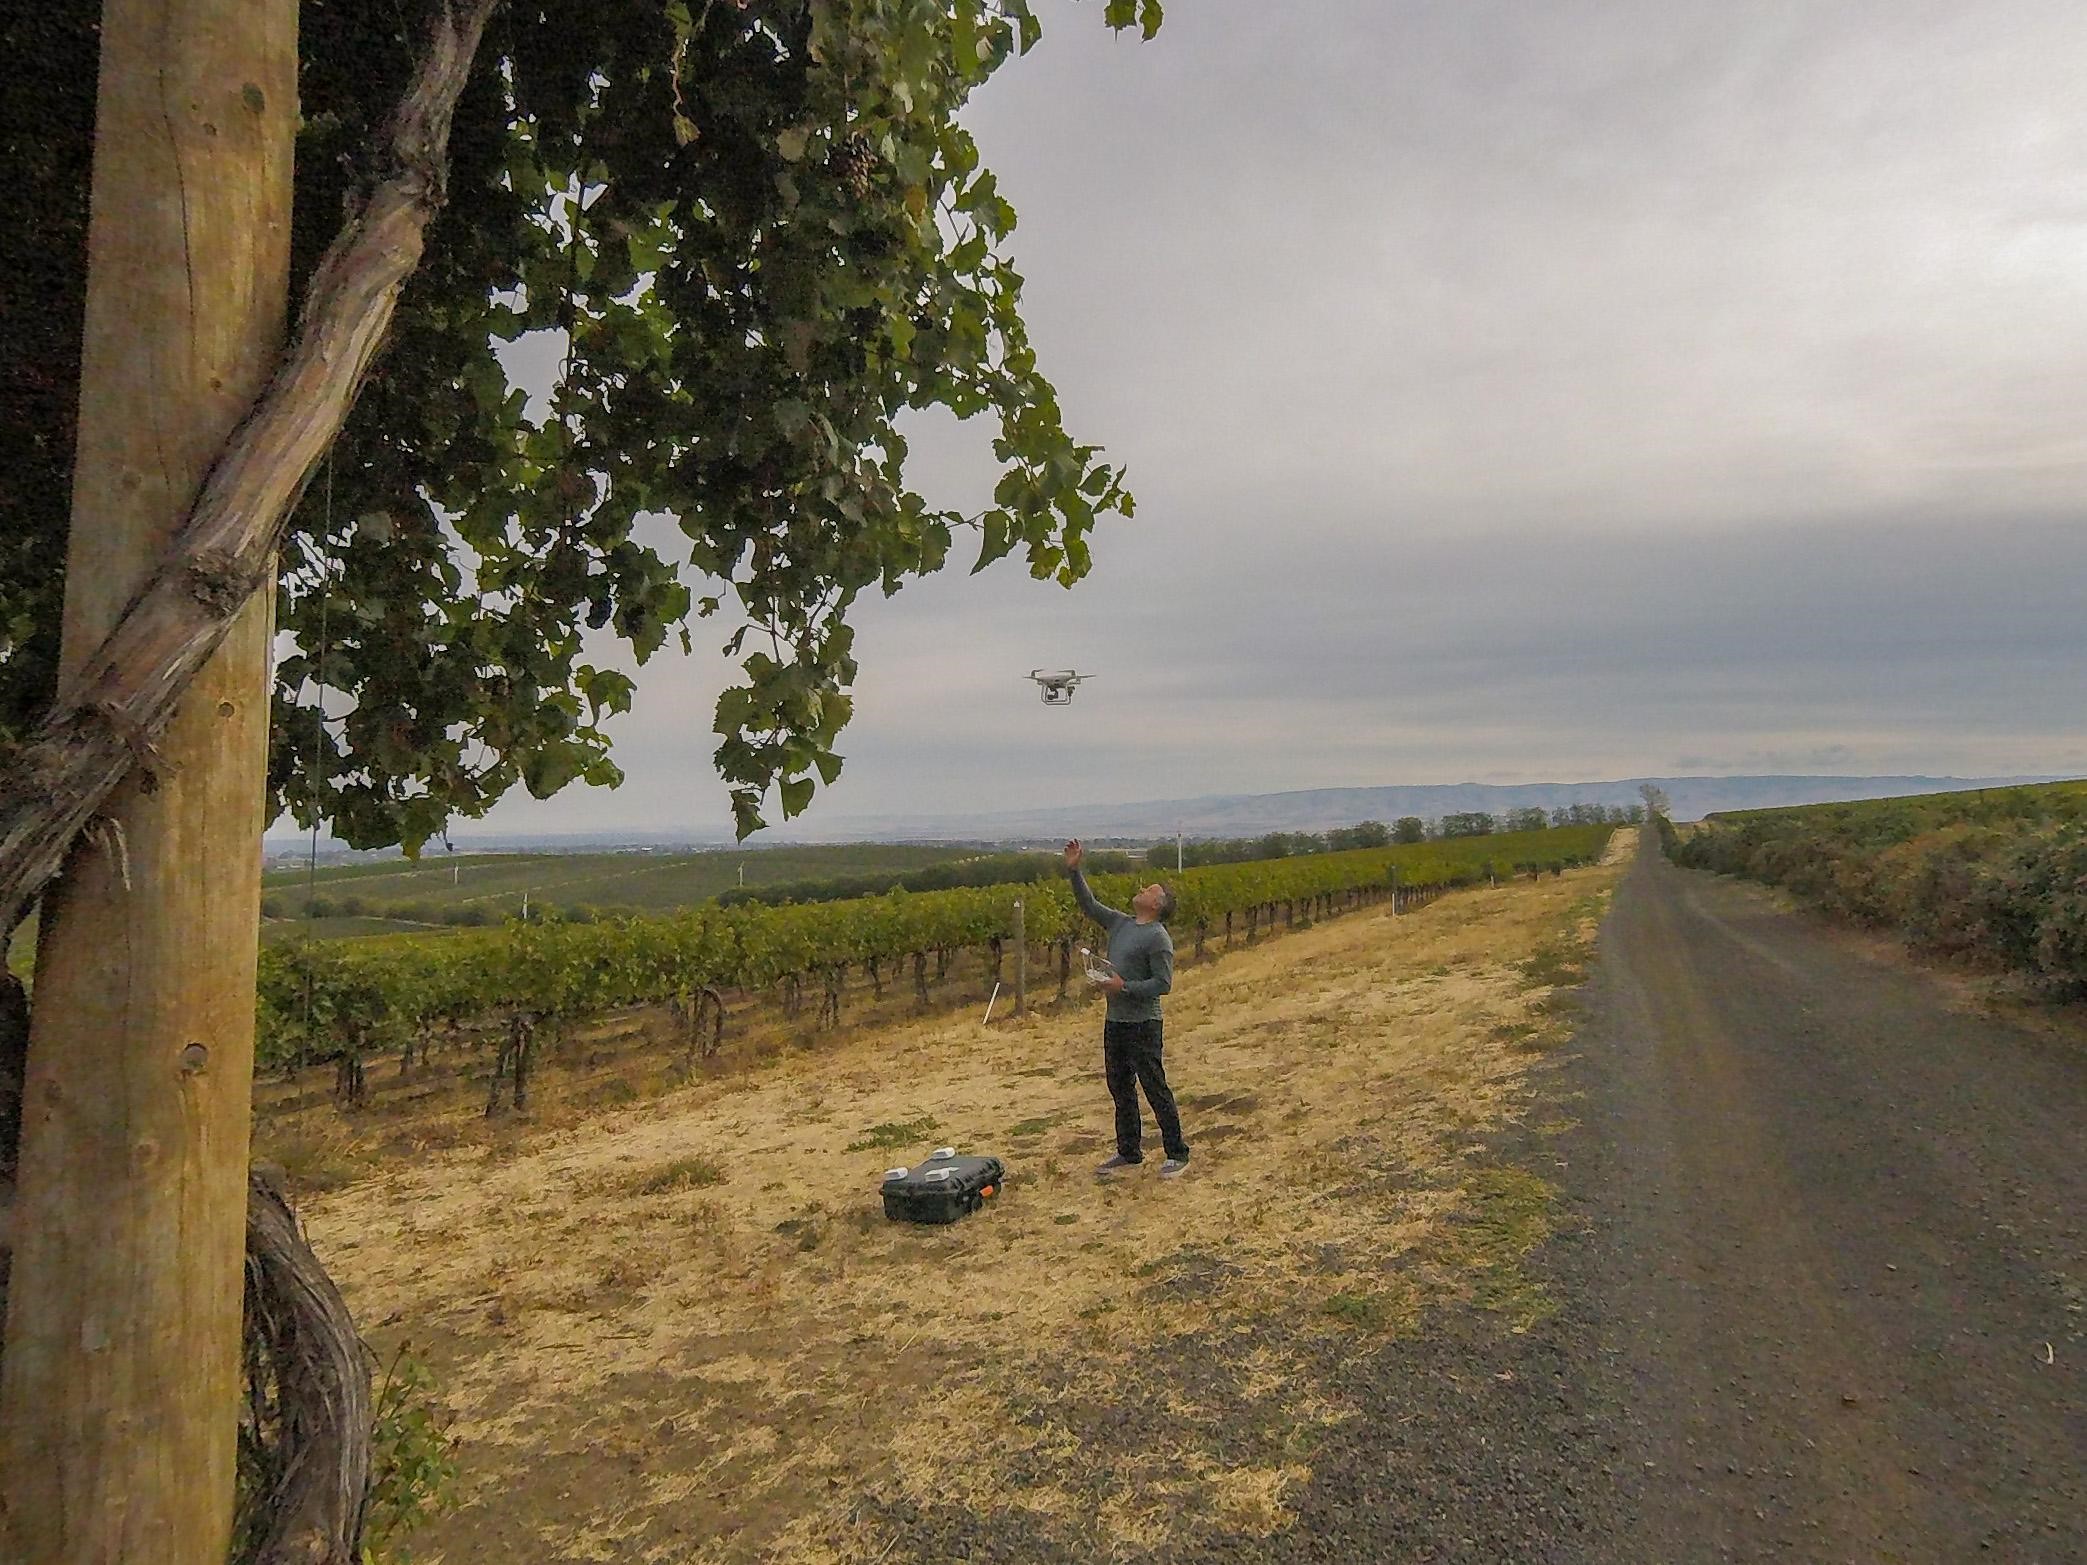 Flying Drones over wine grapes